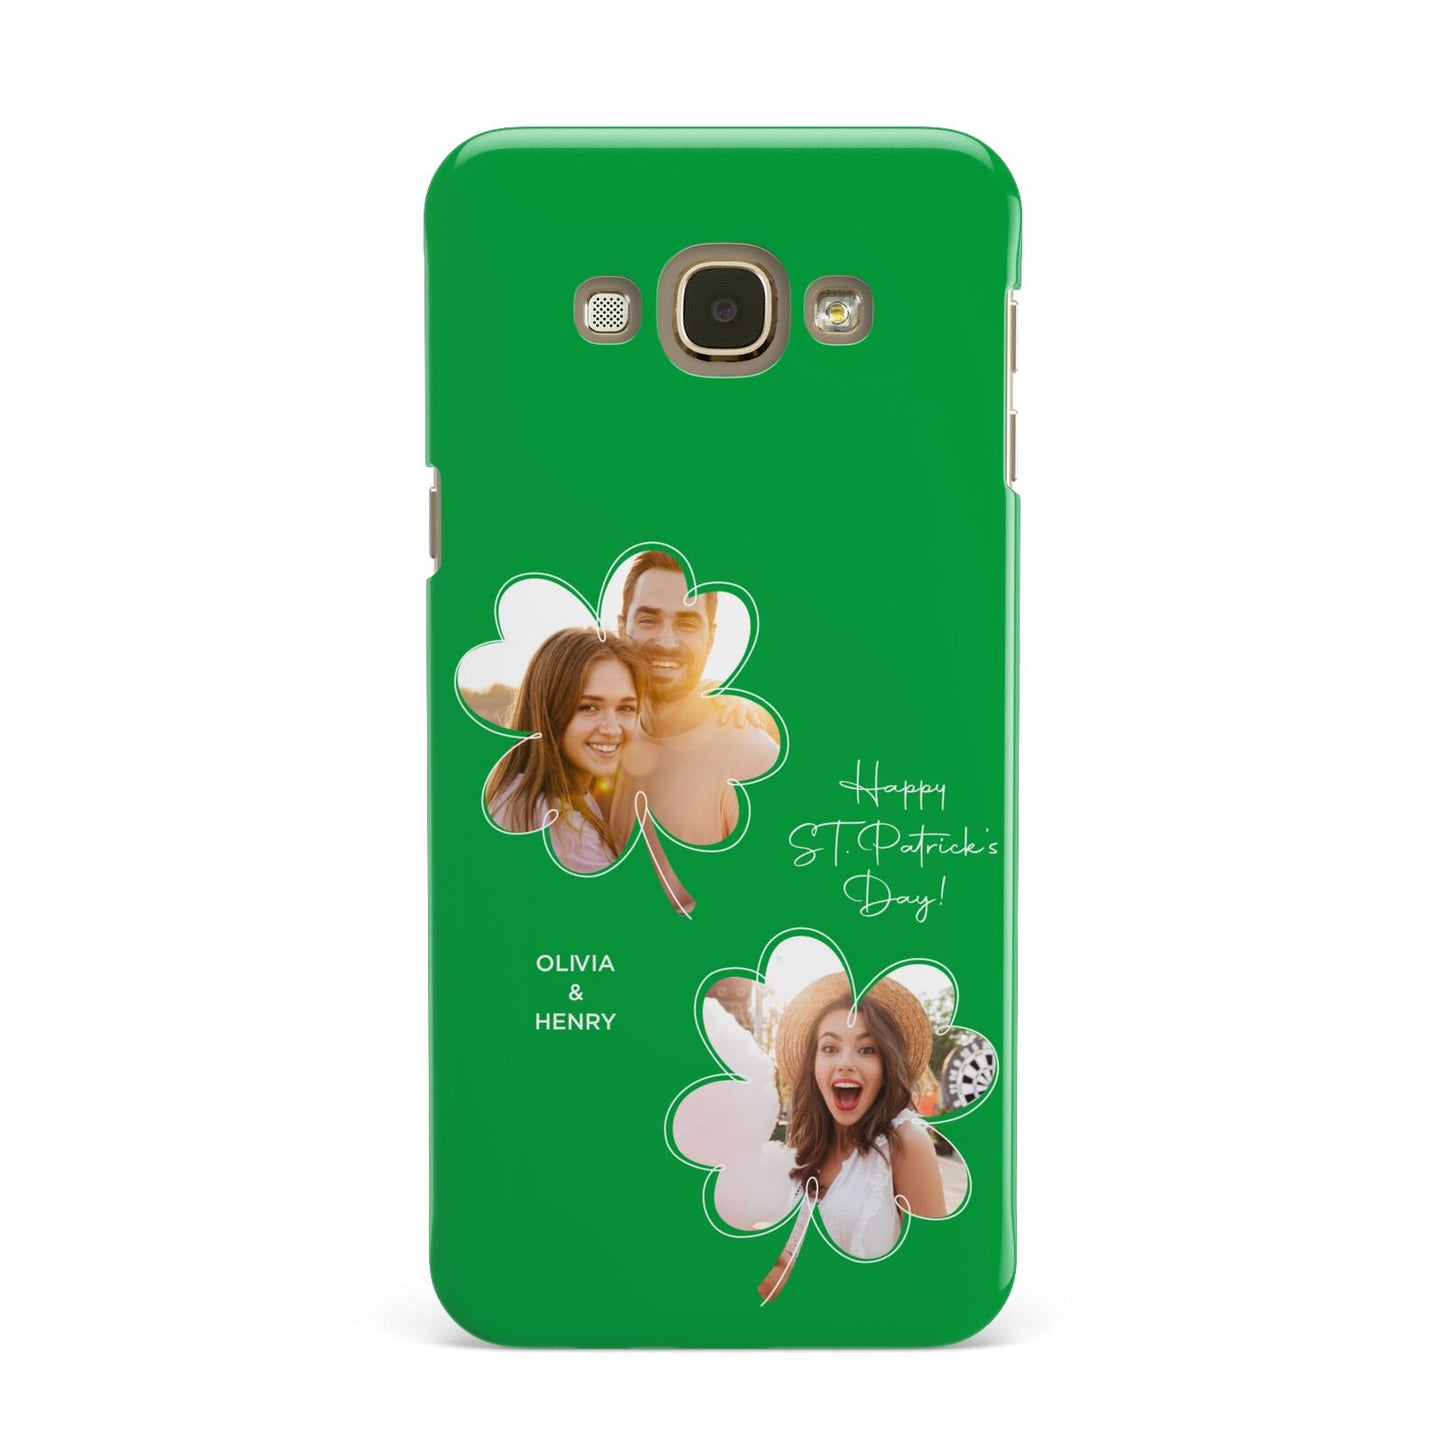 Personalised Photo St Patricks Day Samsung Galaxy A8 Case